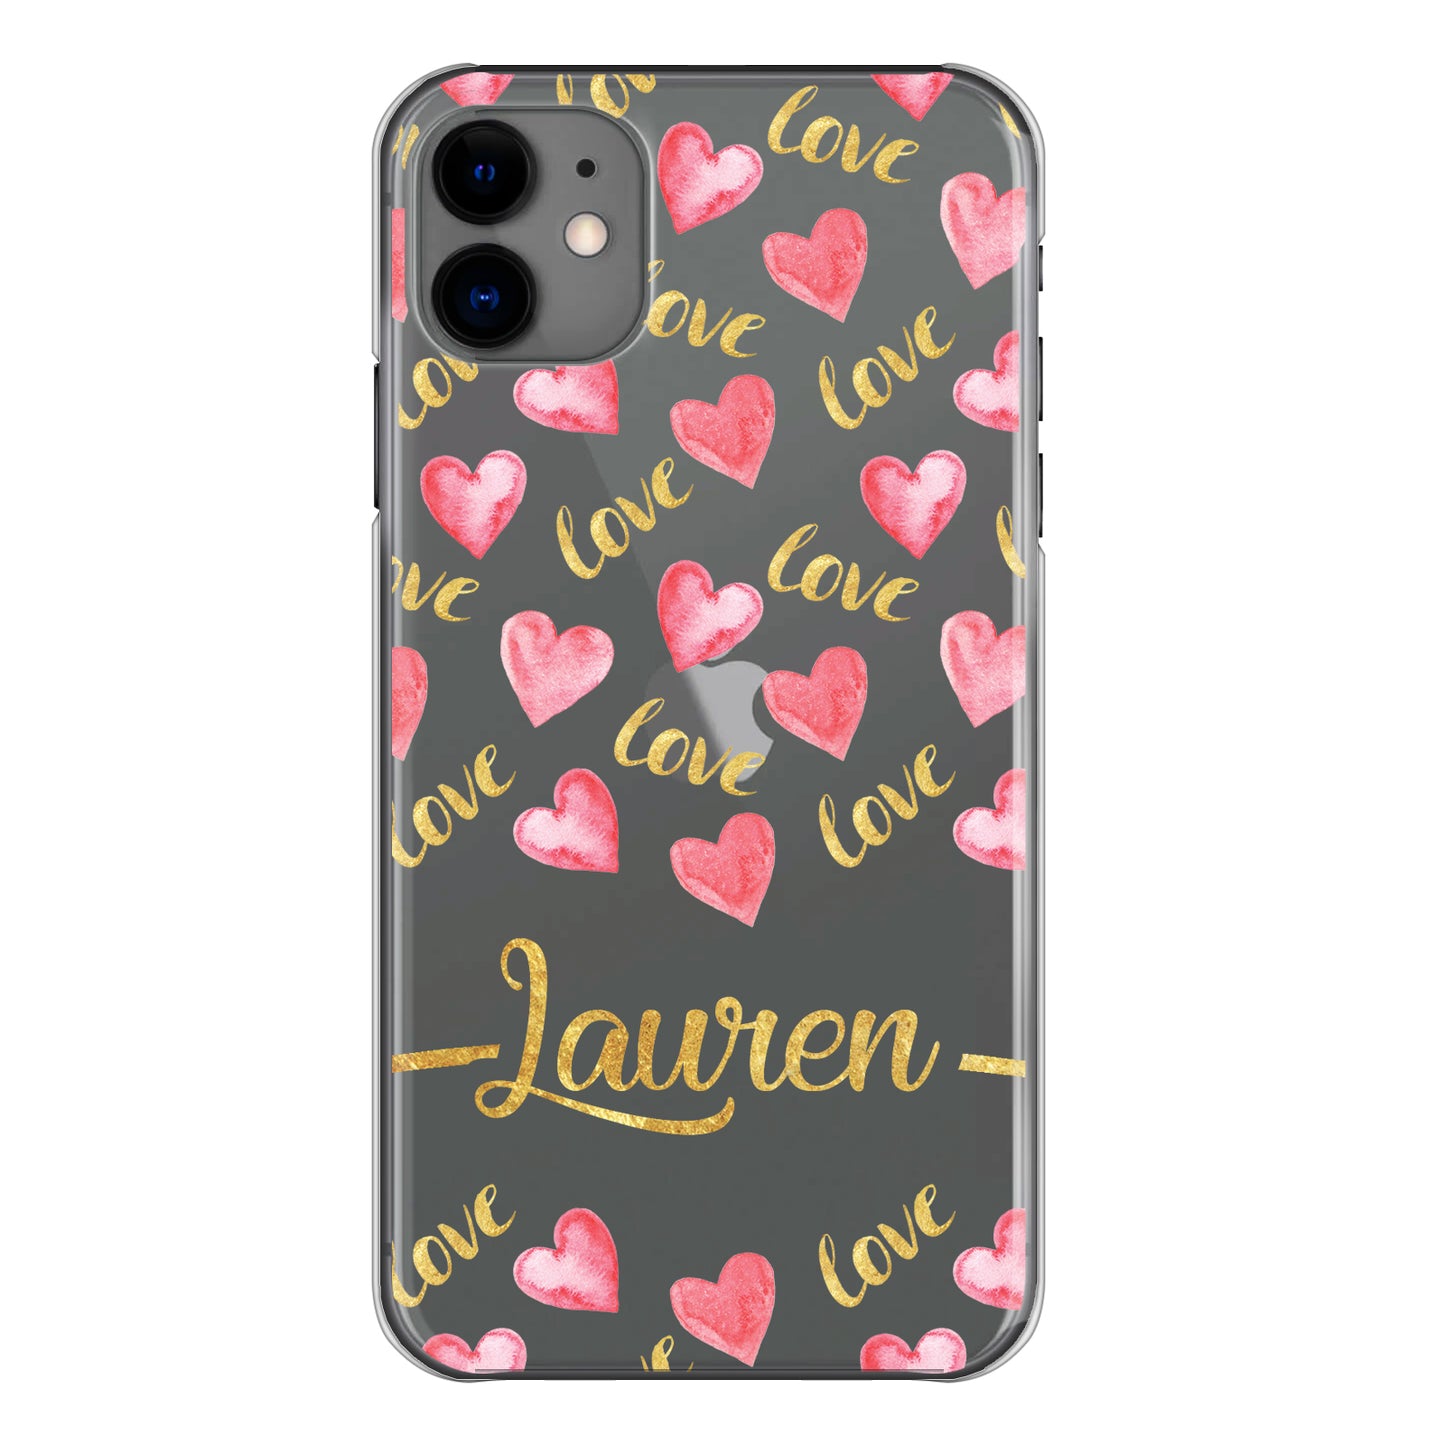 Personalised Oppo Phone Hard Case with Love Hearts and Cute Gold Text